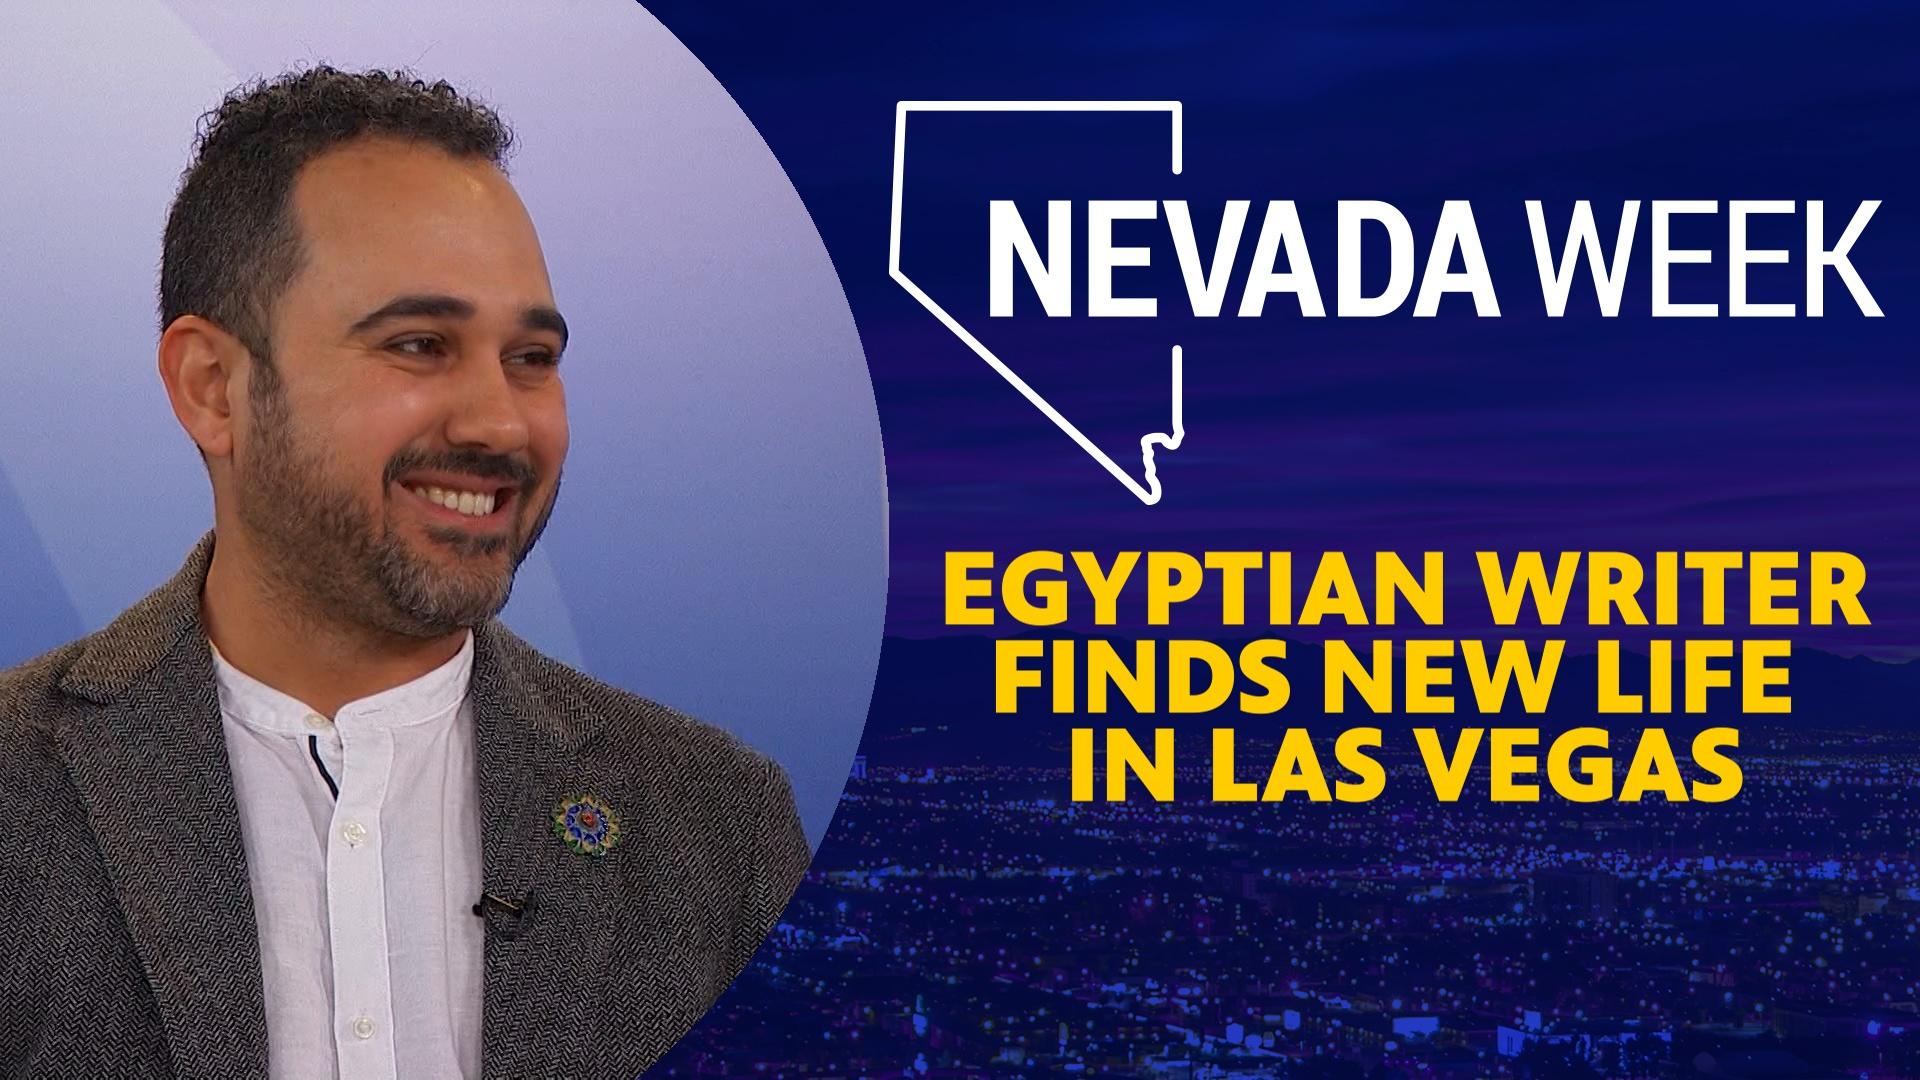 Egyptian writer finds new life in Las Vegas